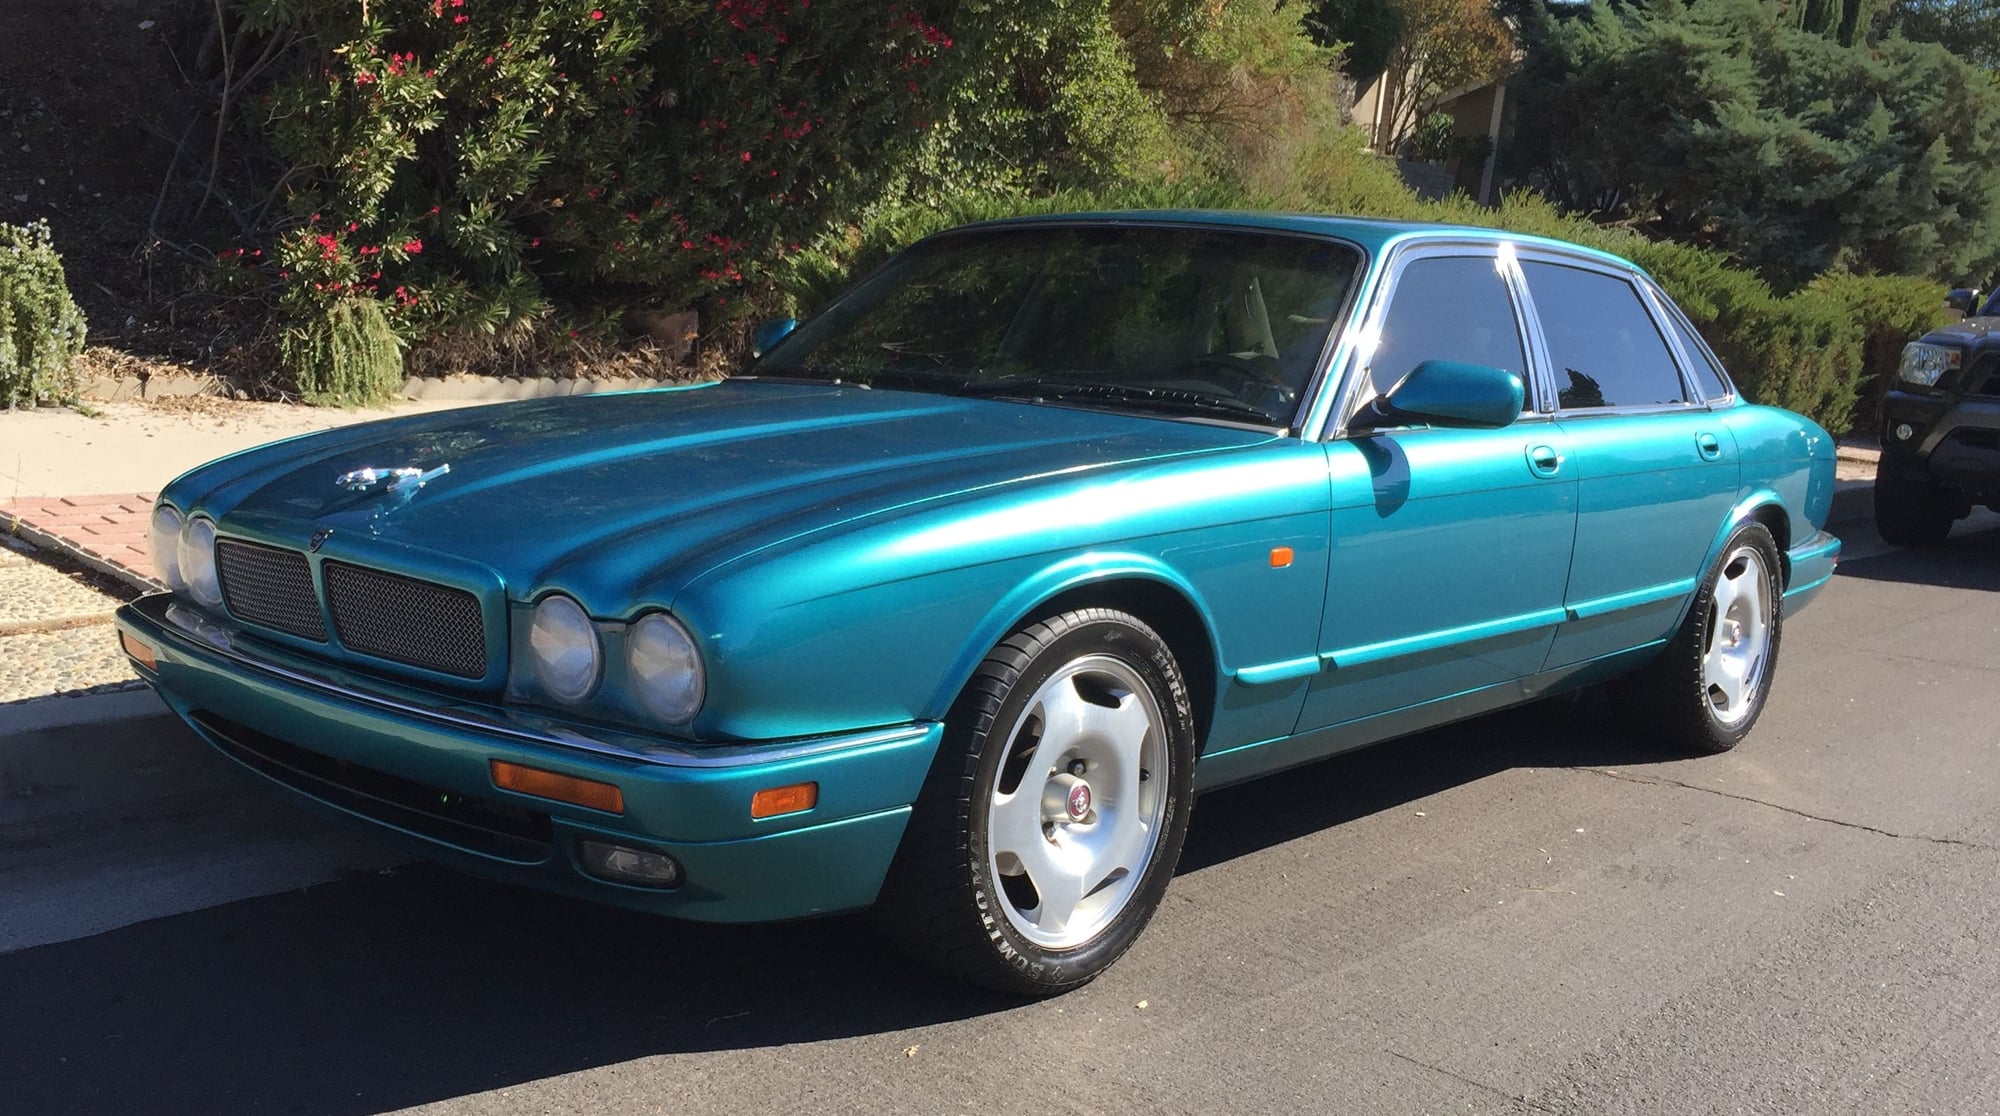 1995 Jaguar XJR - 1995 Jaguar XJR supercharged - one family owned - beautiful - Used - VIN SAJPX1143SC728030 - 67,000 Miles - 6 cyl - 2WD - Automatic - Sedan - Blue - Los Angeles, CA 91304, United States